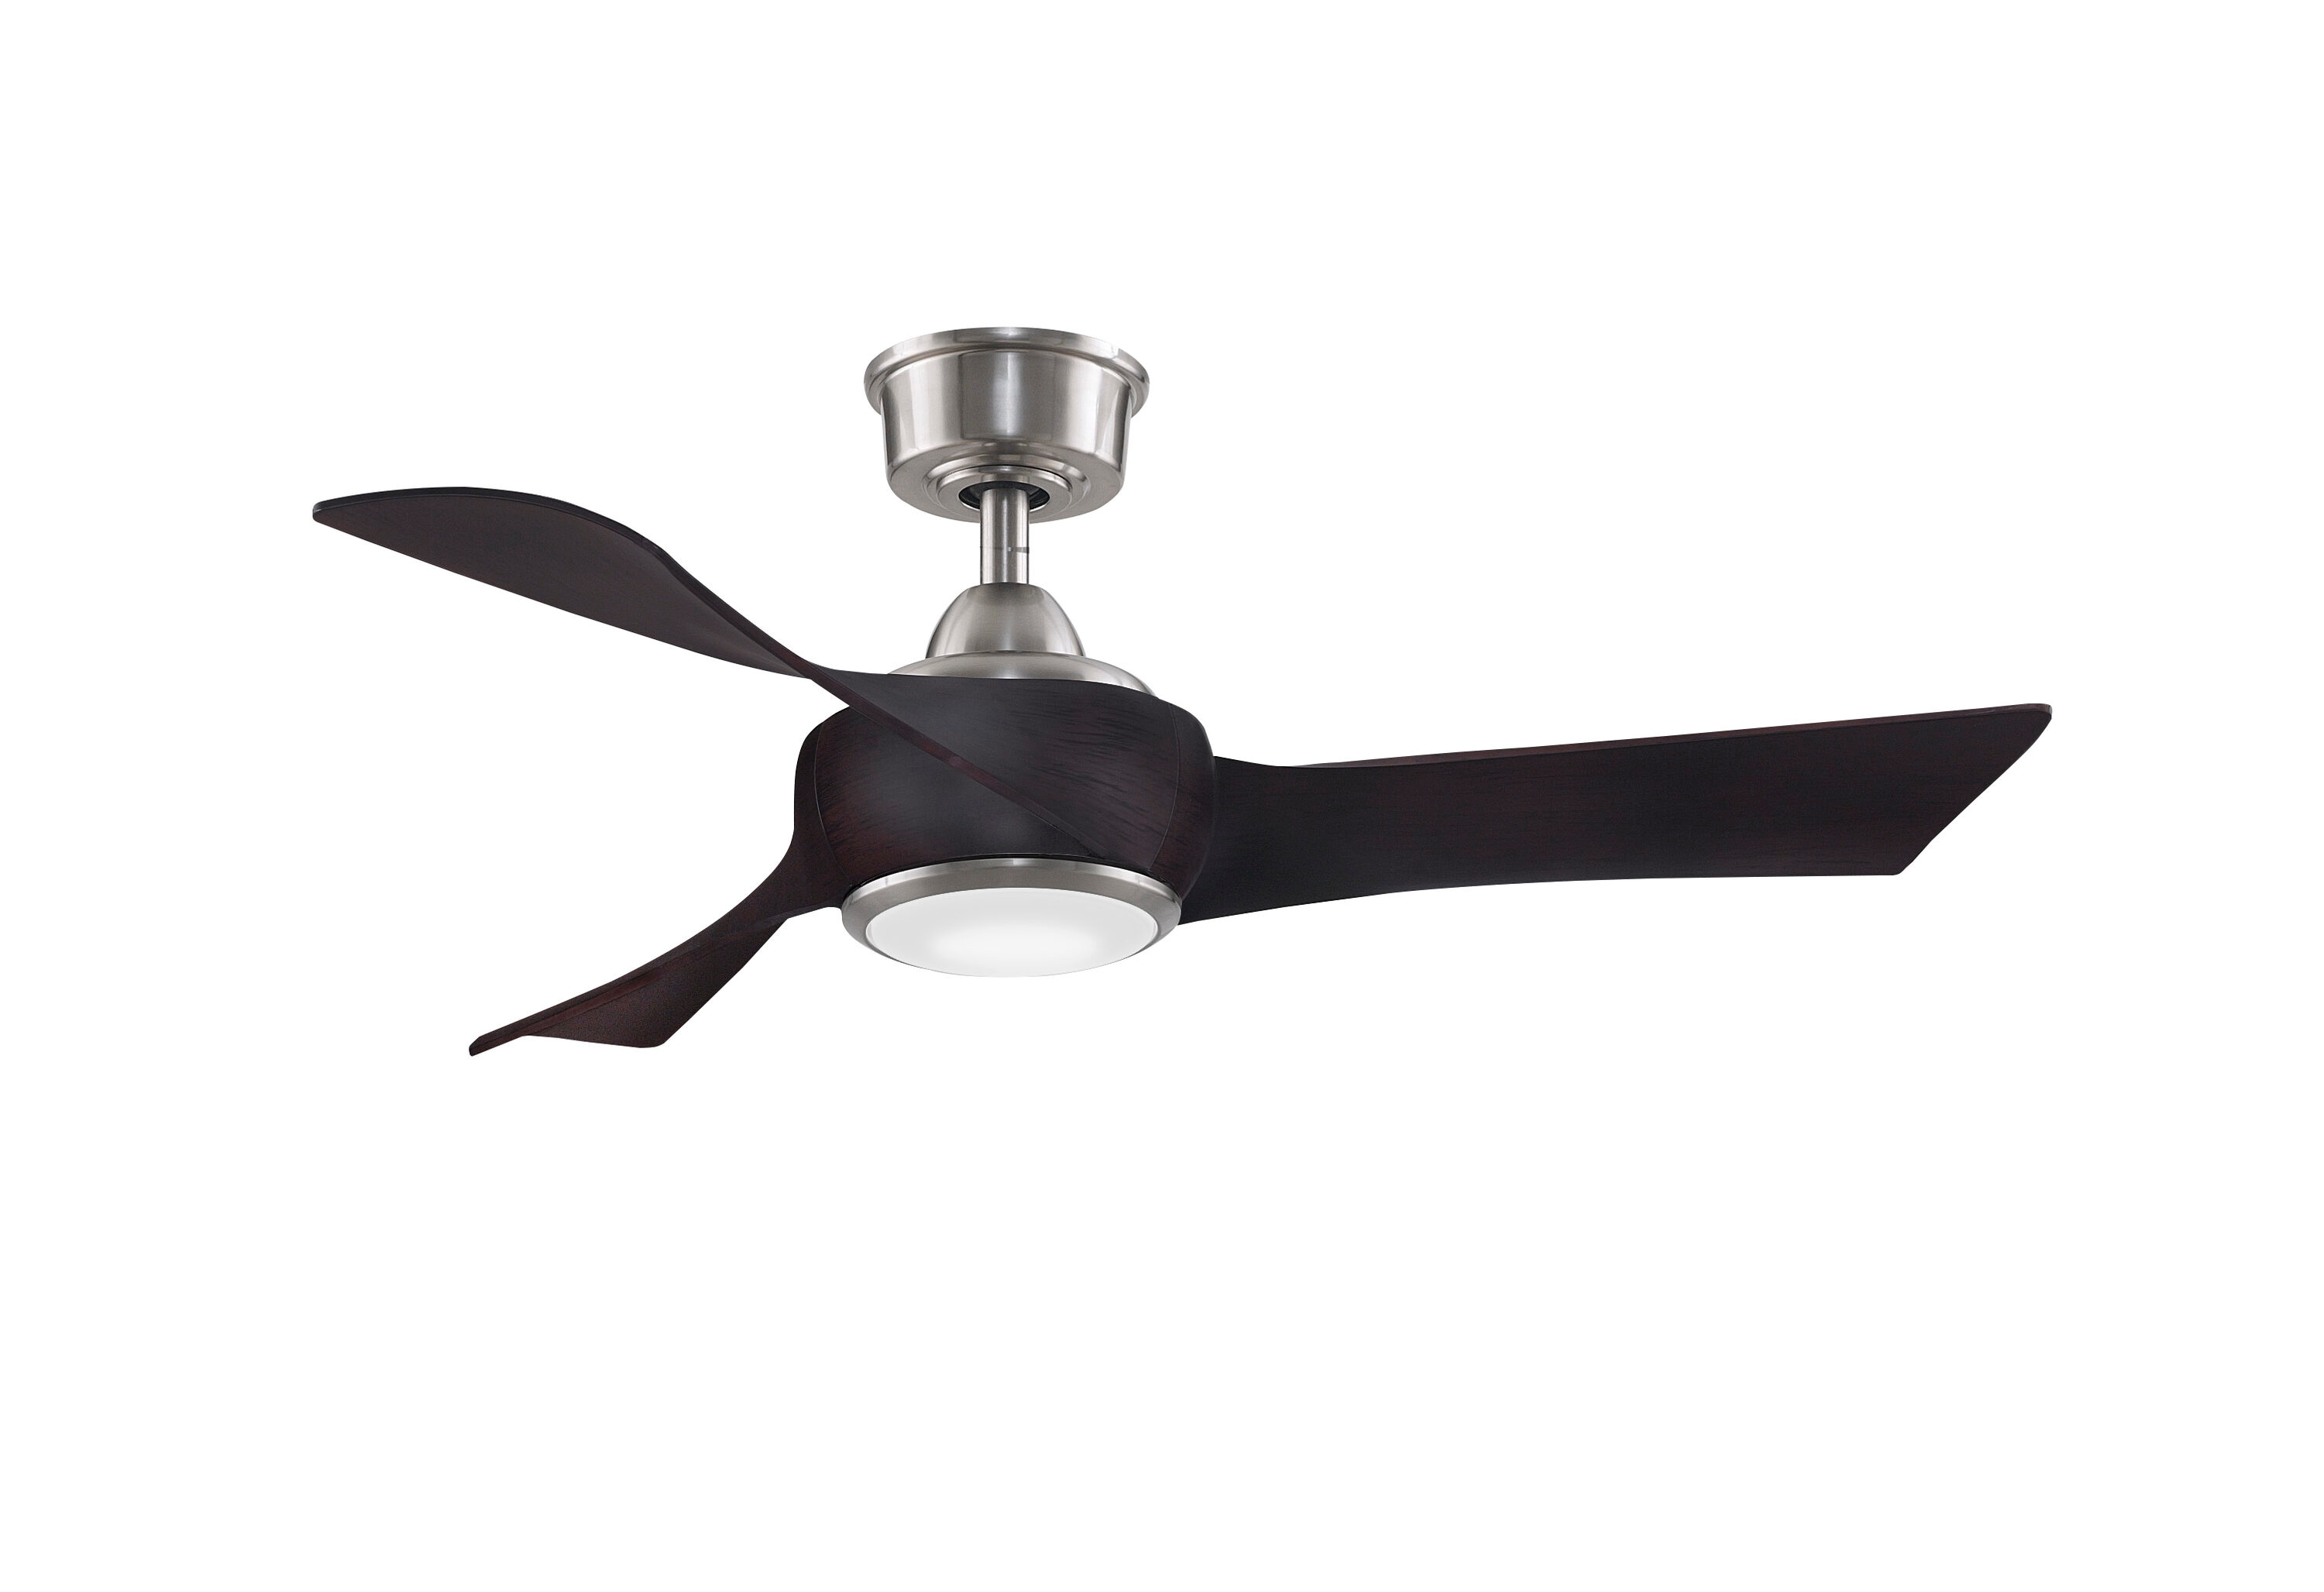 Fanimation Wrap Custom 44-in Brushed Nickel Color-changing LED Indoor/Outdoor Smart Ceiling Fan with Light Remote (3-Blade) Walnut -  FPD8530BN-44DWA-LK